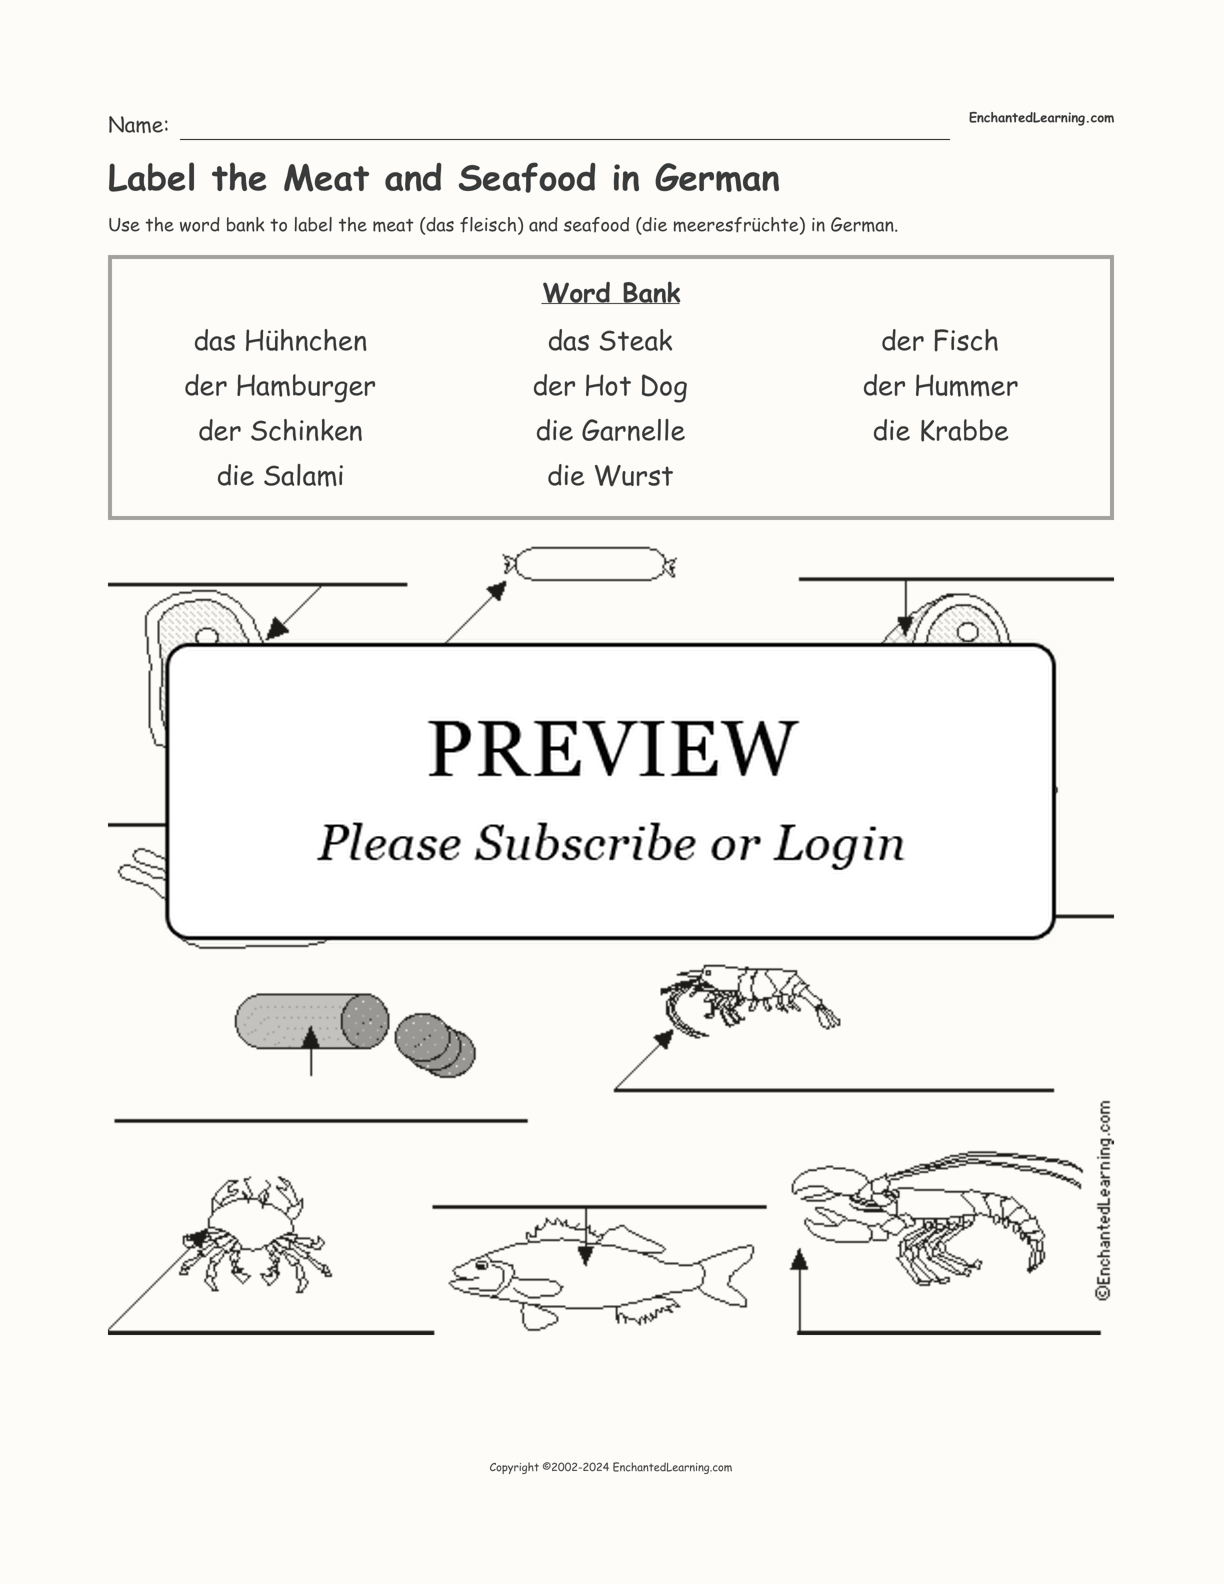 Label the Meat and Seafood in German interactive worksheet page 1